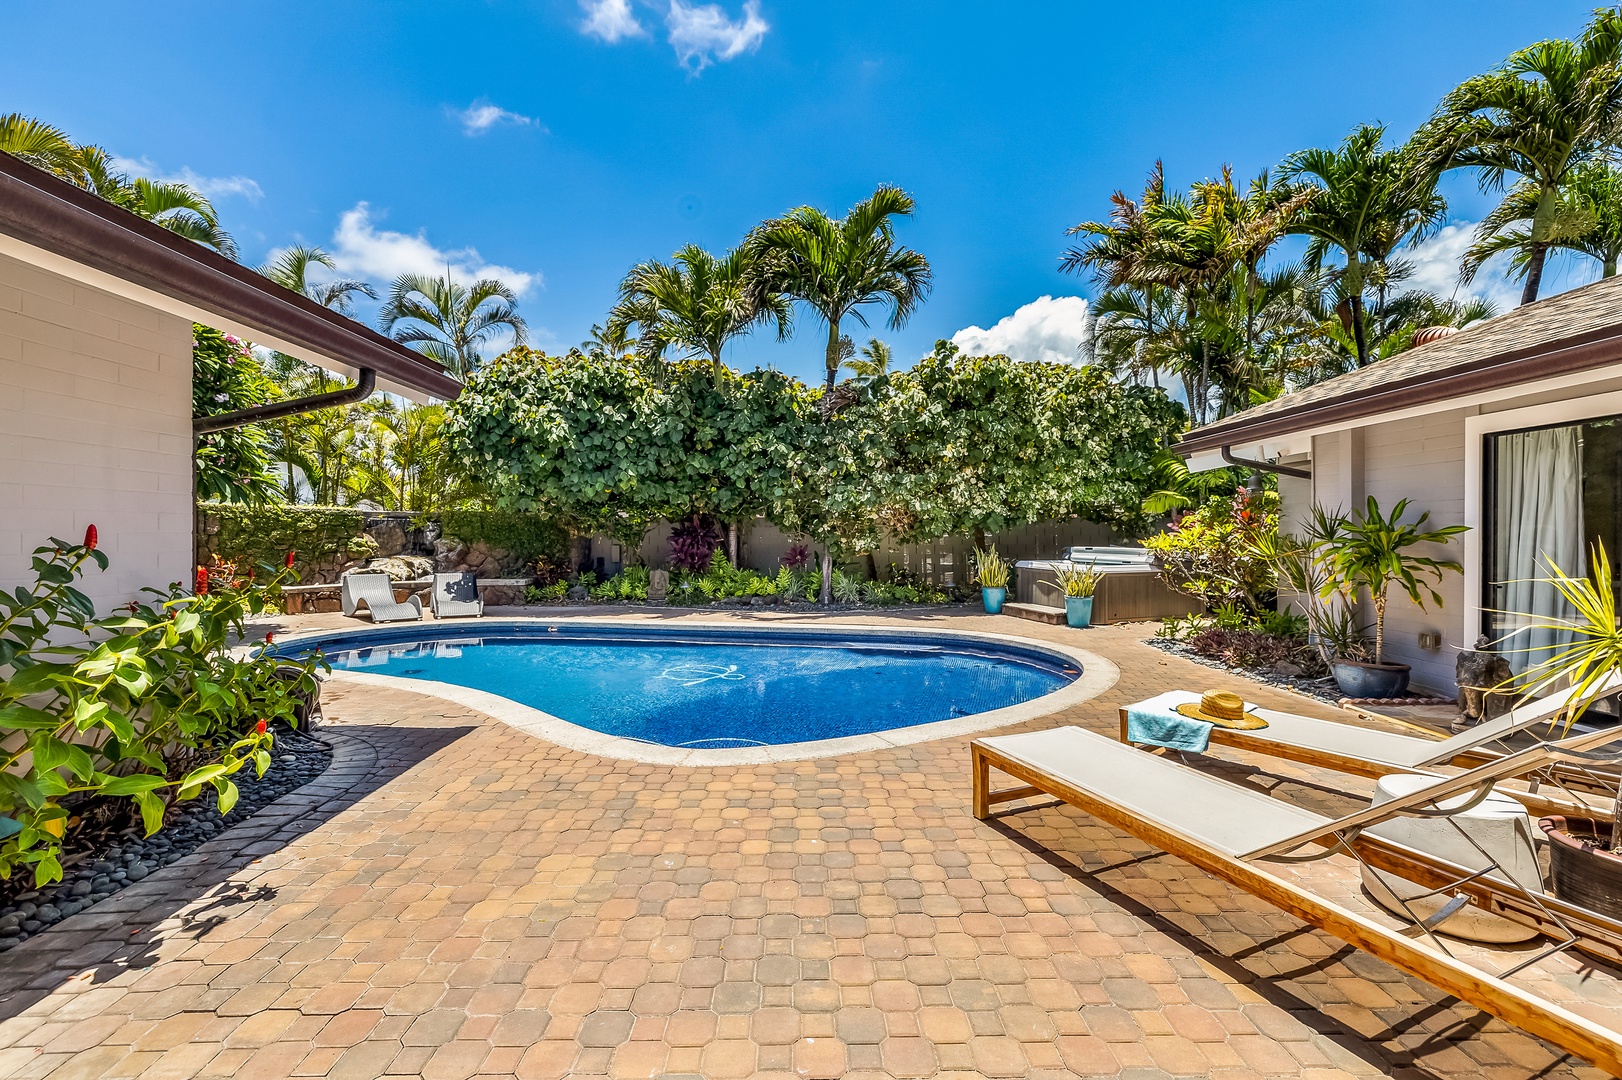 Kailua Vacation Rentals, Hale Ohana - Tranquil pool deck with a jacuzzi and waterfall